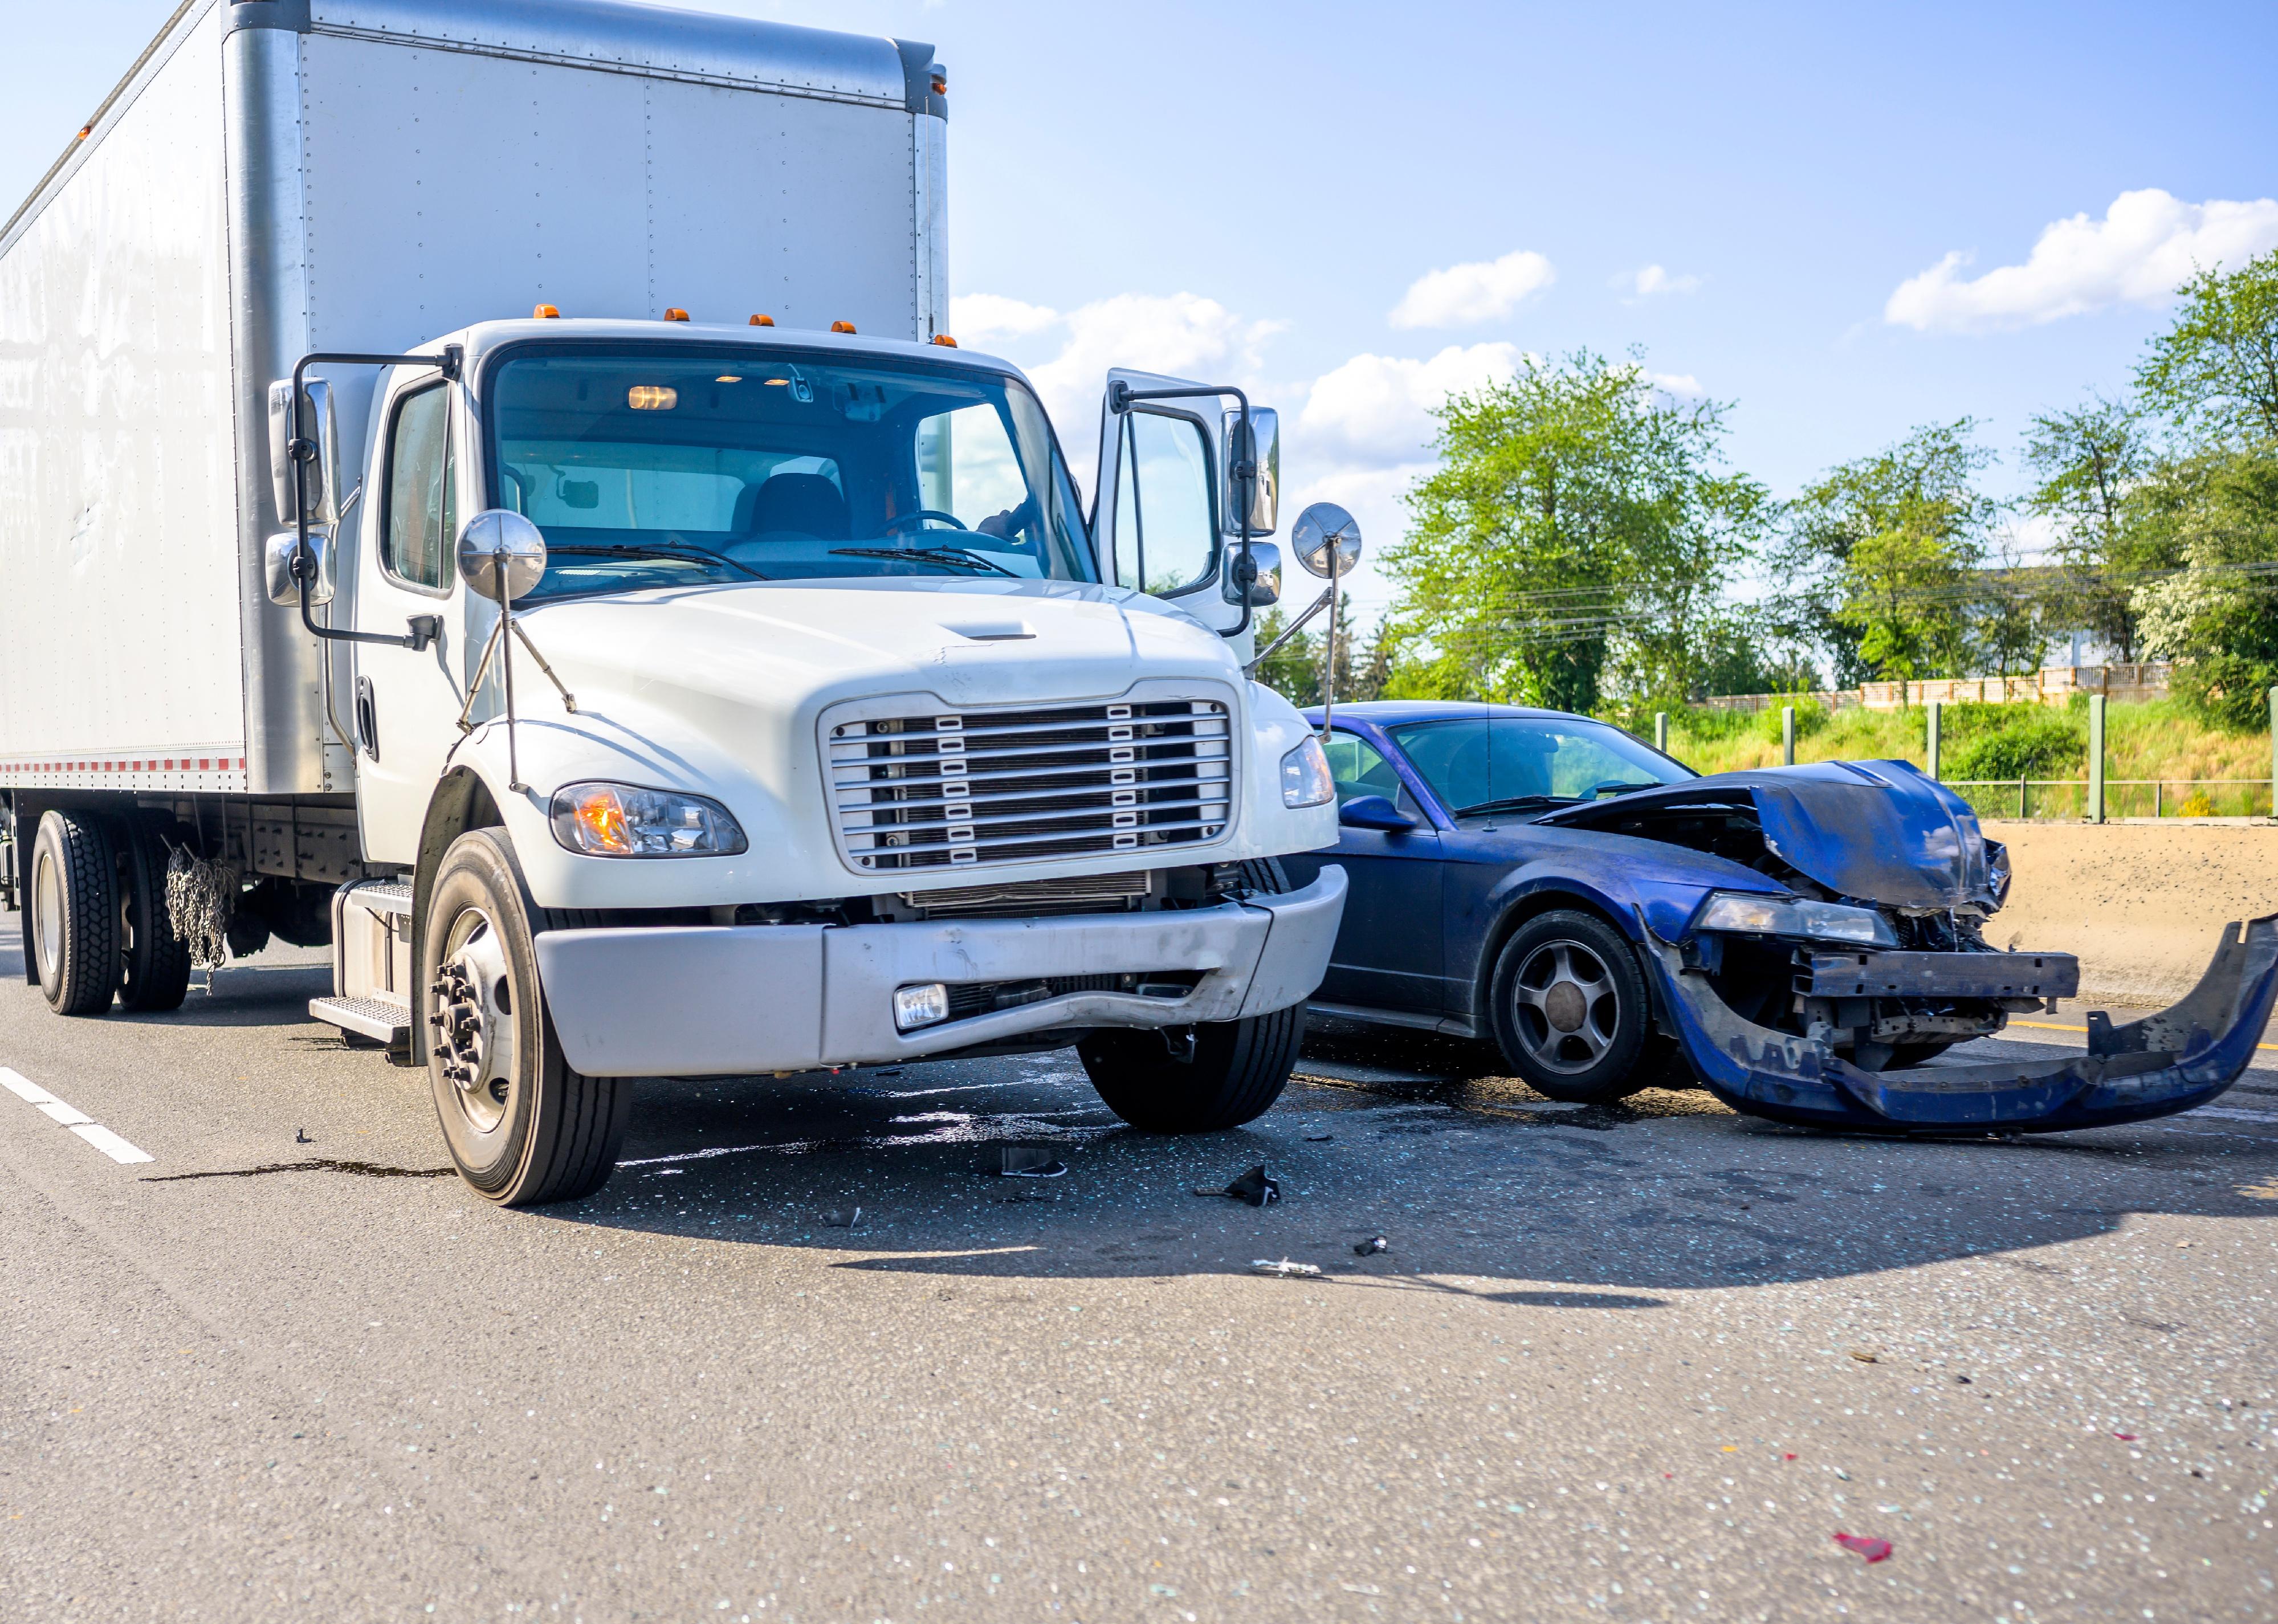 Collision of a semi-truck and a passenger car on the highway.